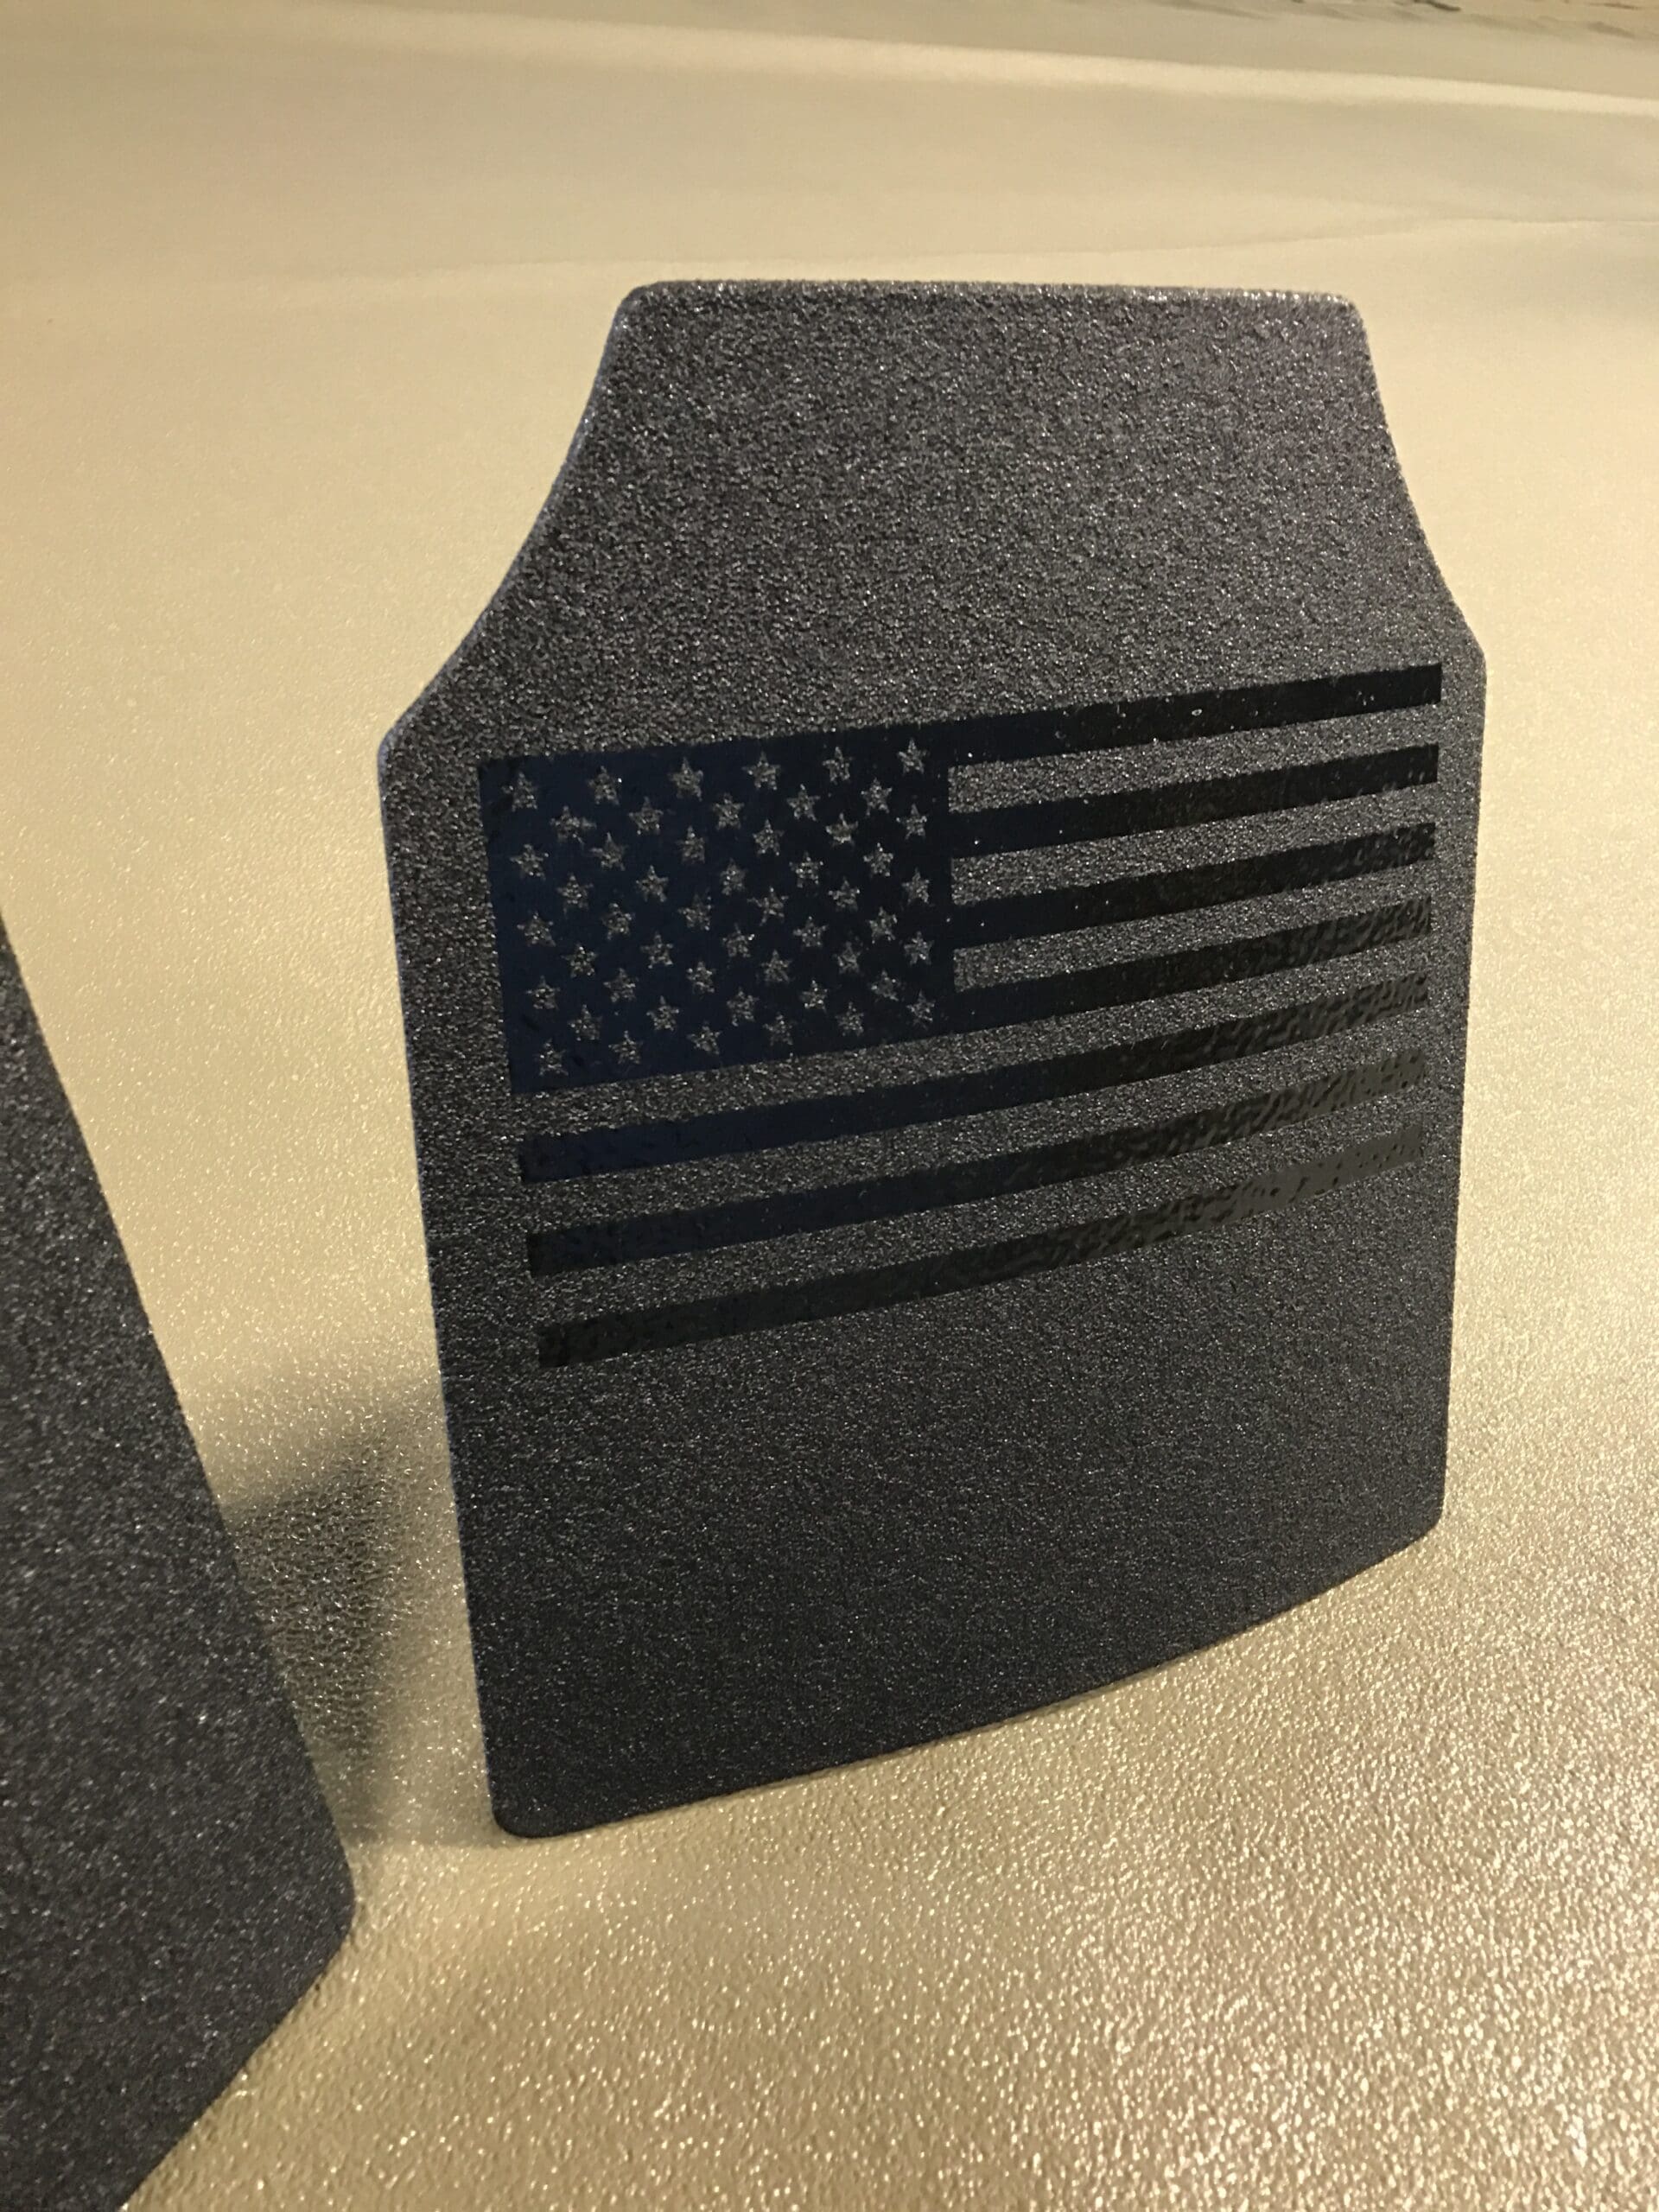 body armor plate with flag